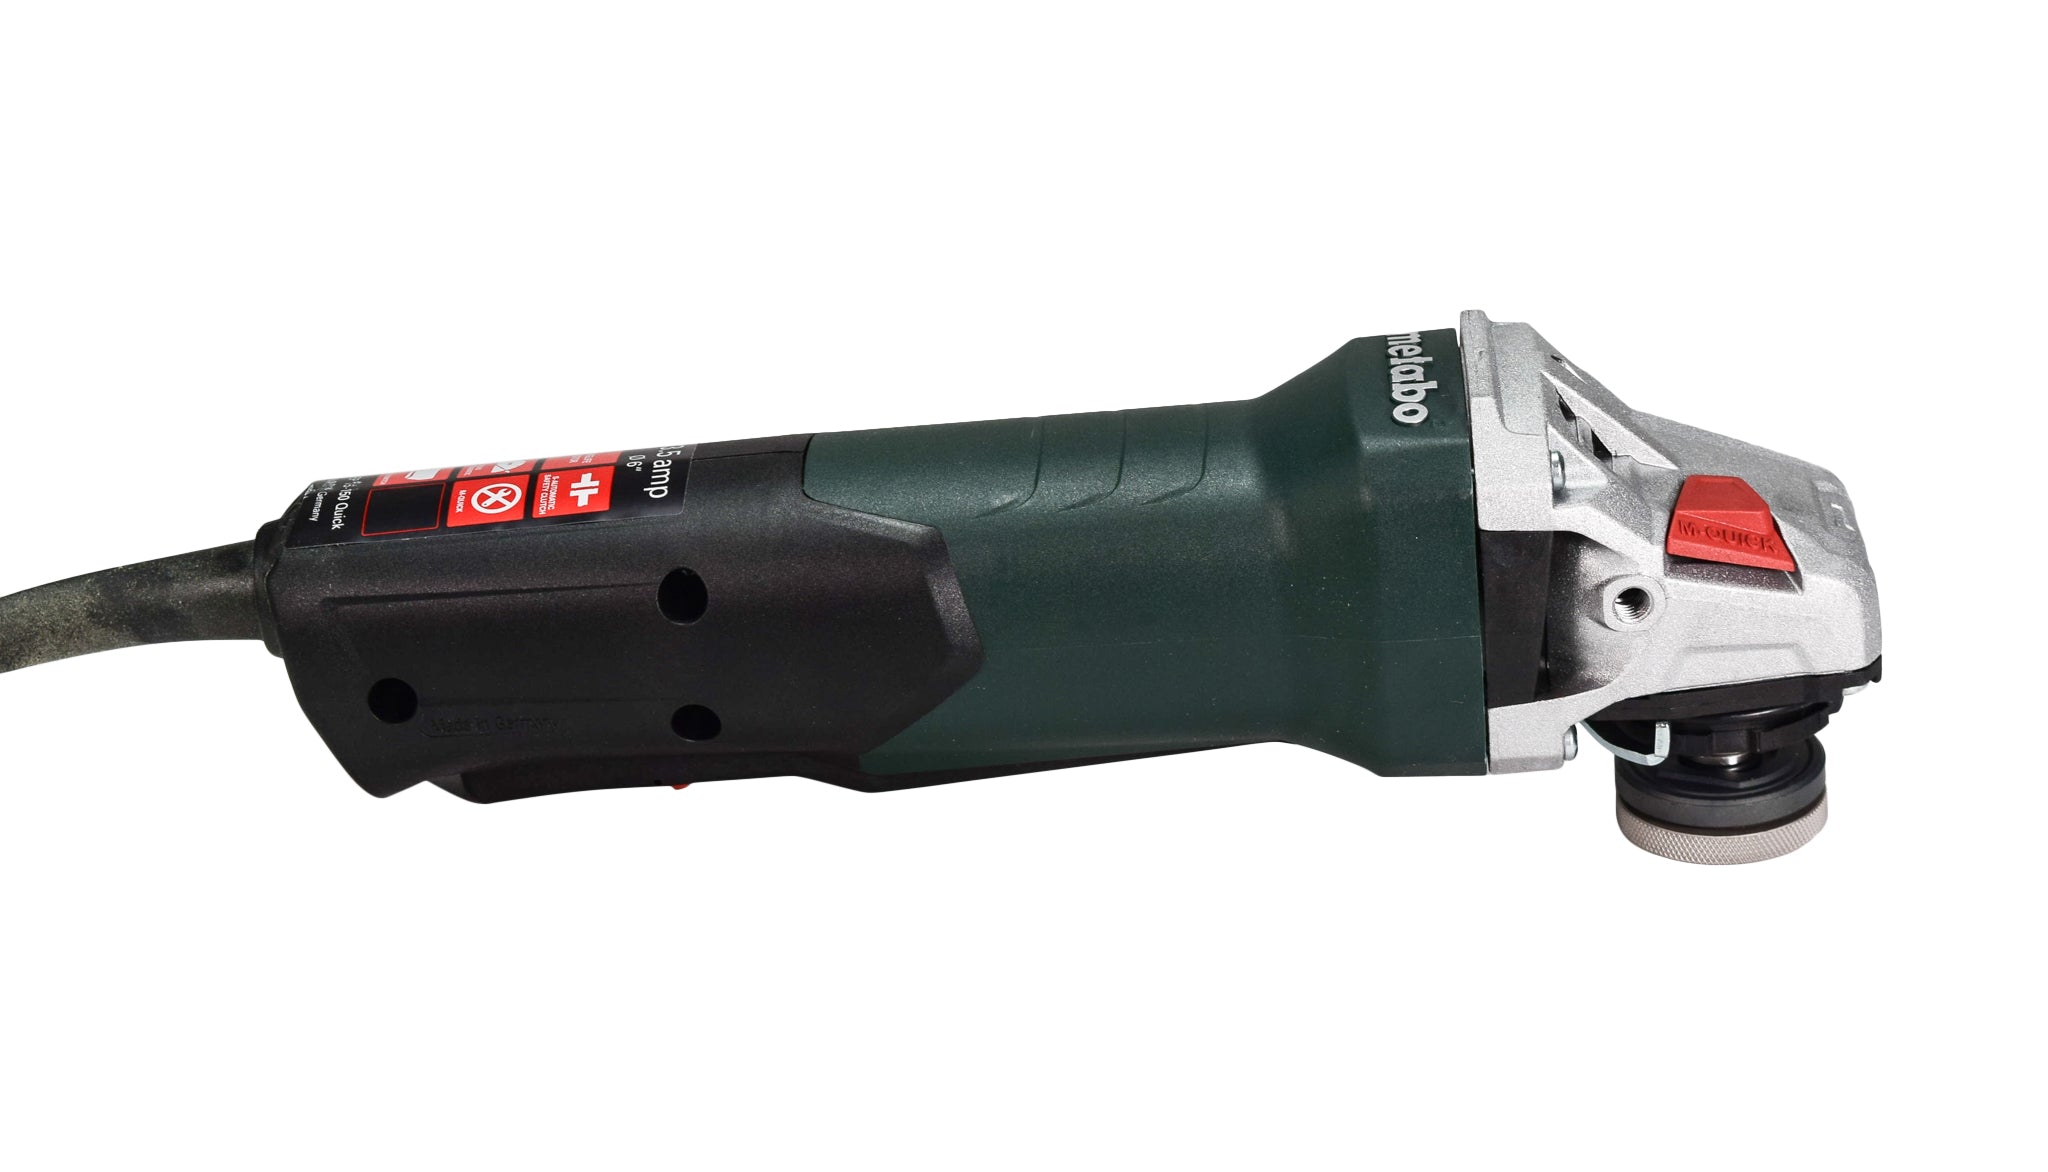 Metabo-600488420-WEP-15-150-Quick-6-Corded-Angle-Grinder-9-600-RPM-13.5-AMP-CLONE-image-9